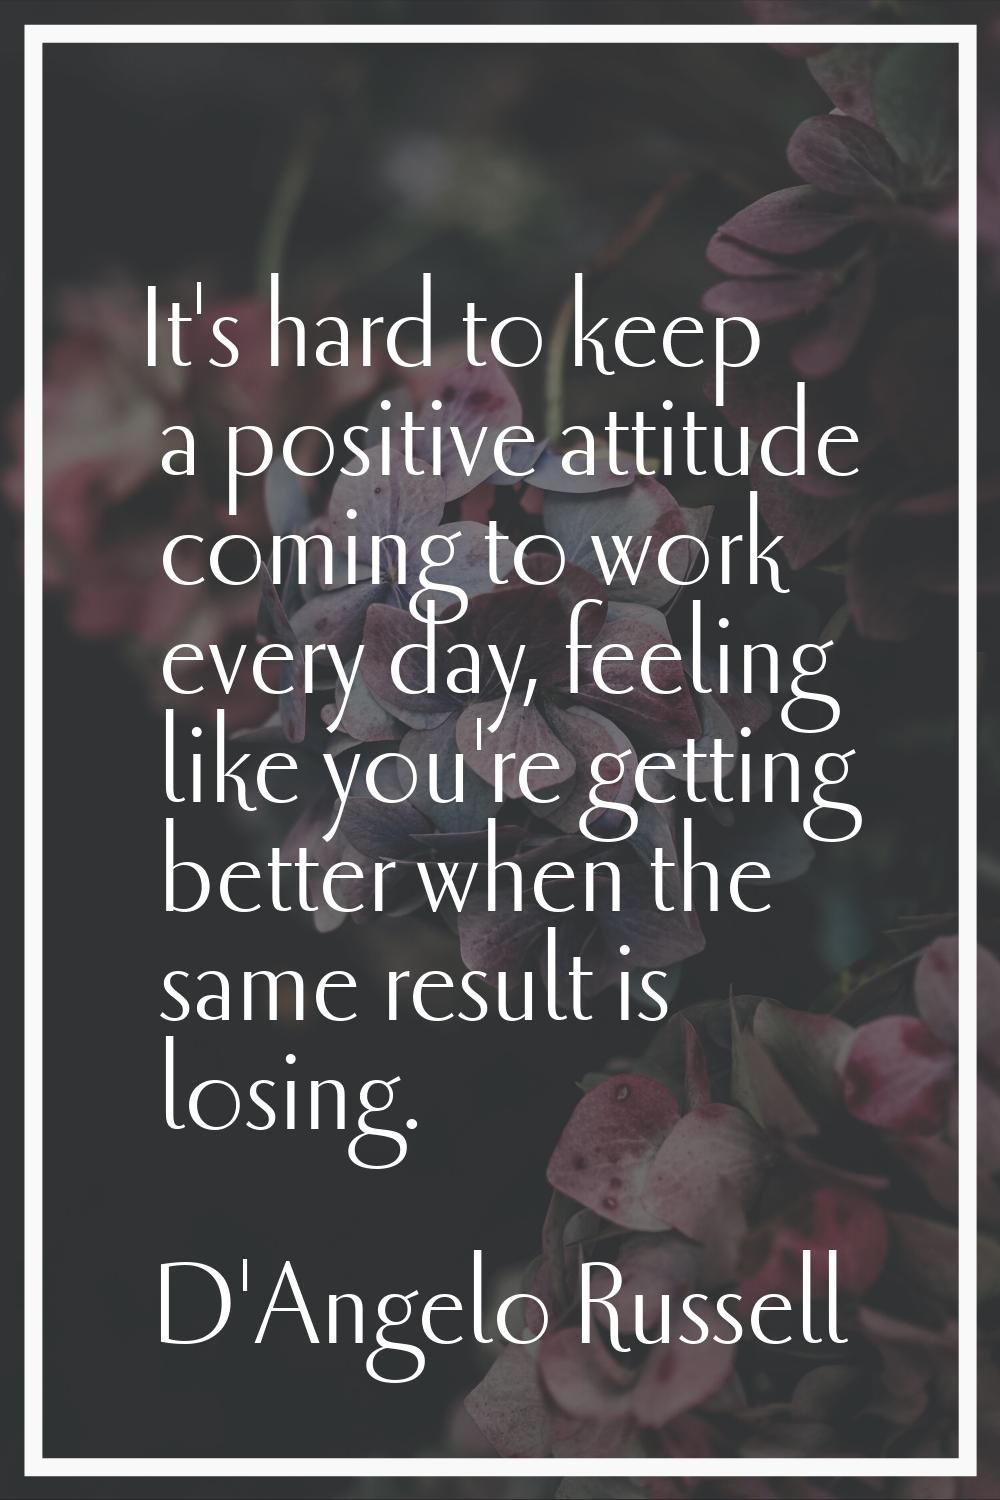 It's hard to keep a positive attitude coming to work every day, feeling like you're getting better 